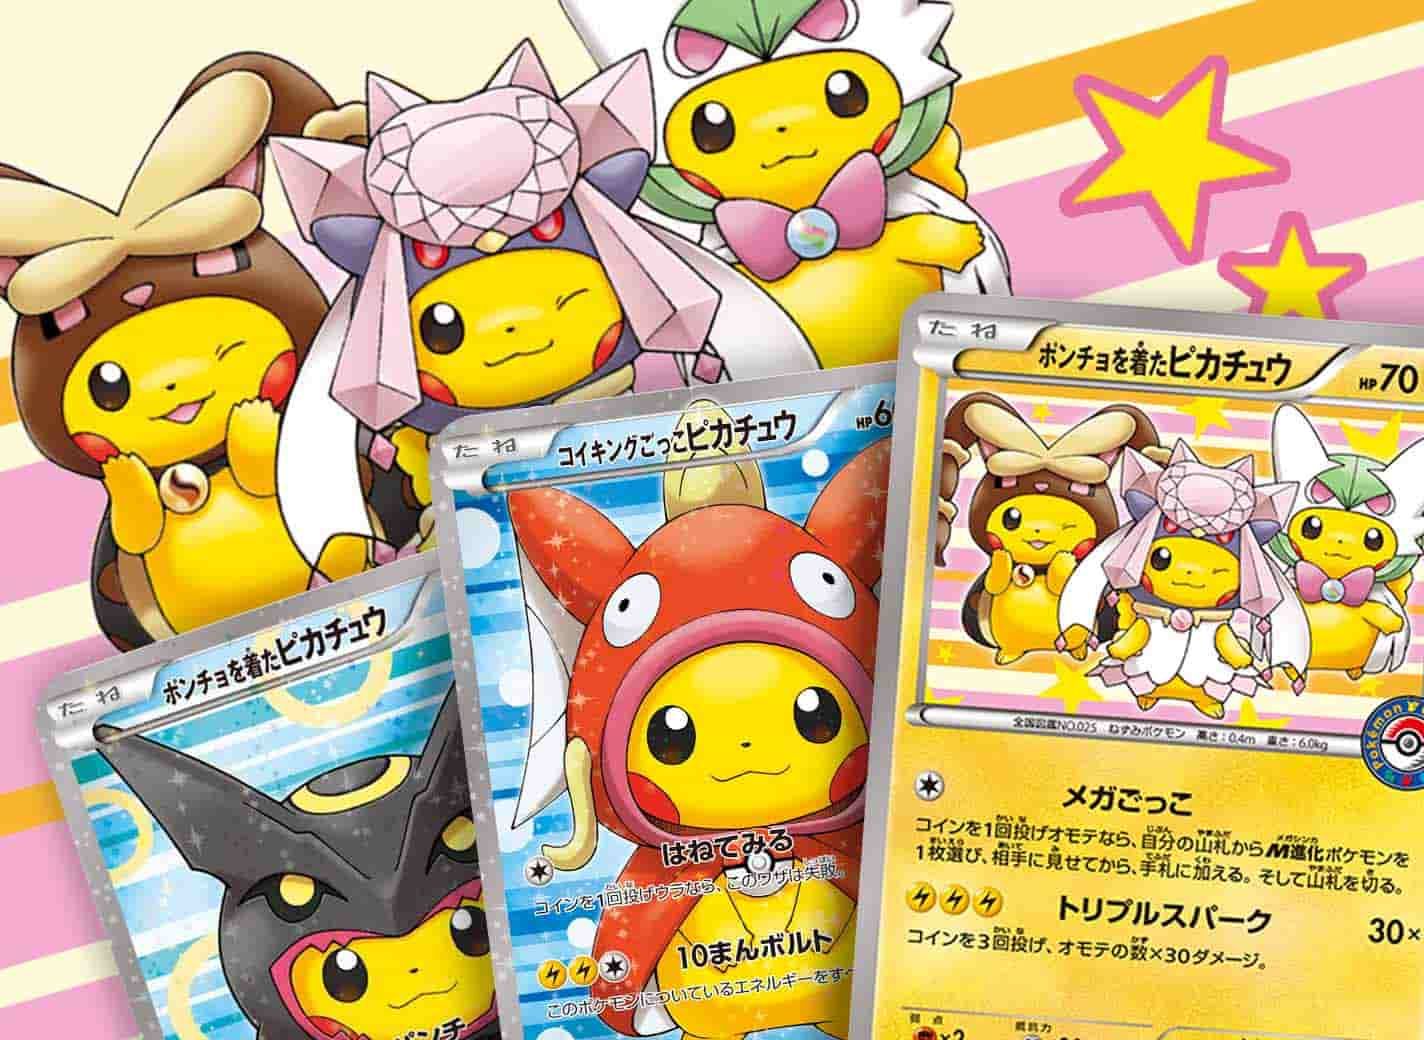 Are pikachu cosplay cards real